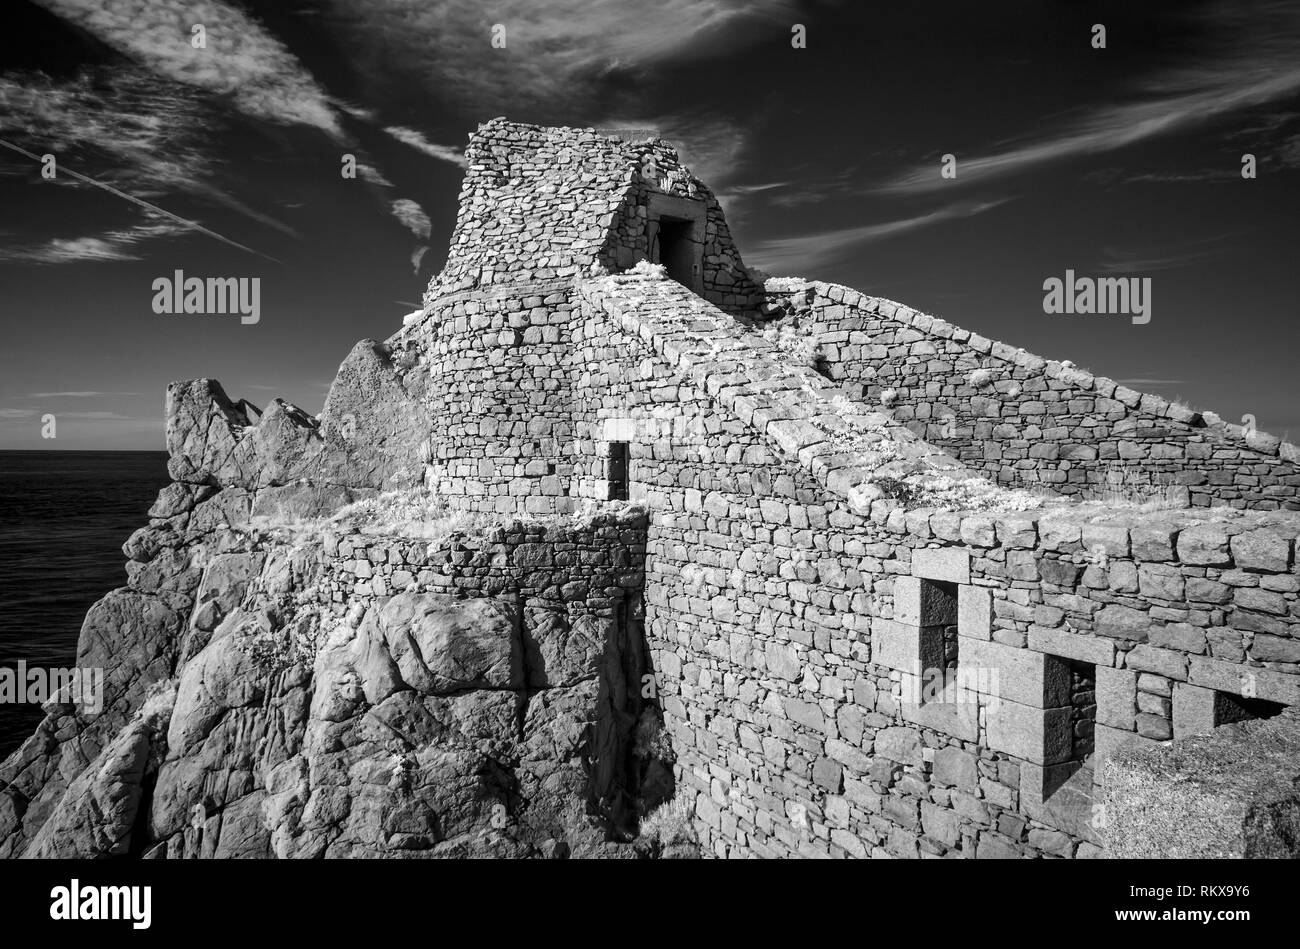 An infrared image of Fort Chateau a' L'Etoc on Alderney, Channel Islands. Stonework texture is enhanced in infrared. Stock Photo